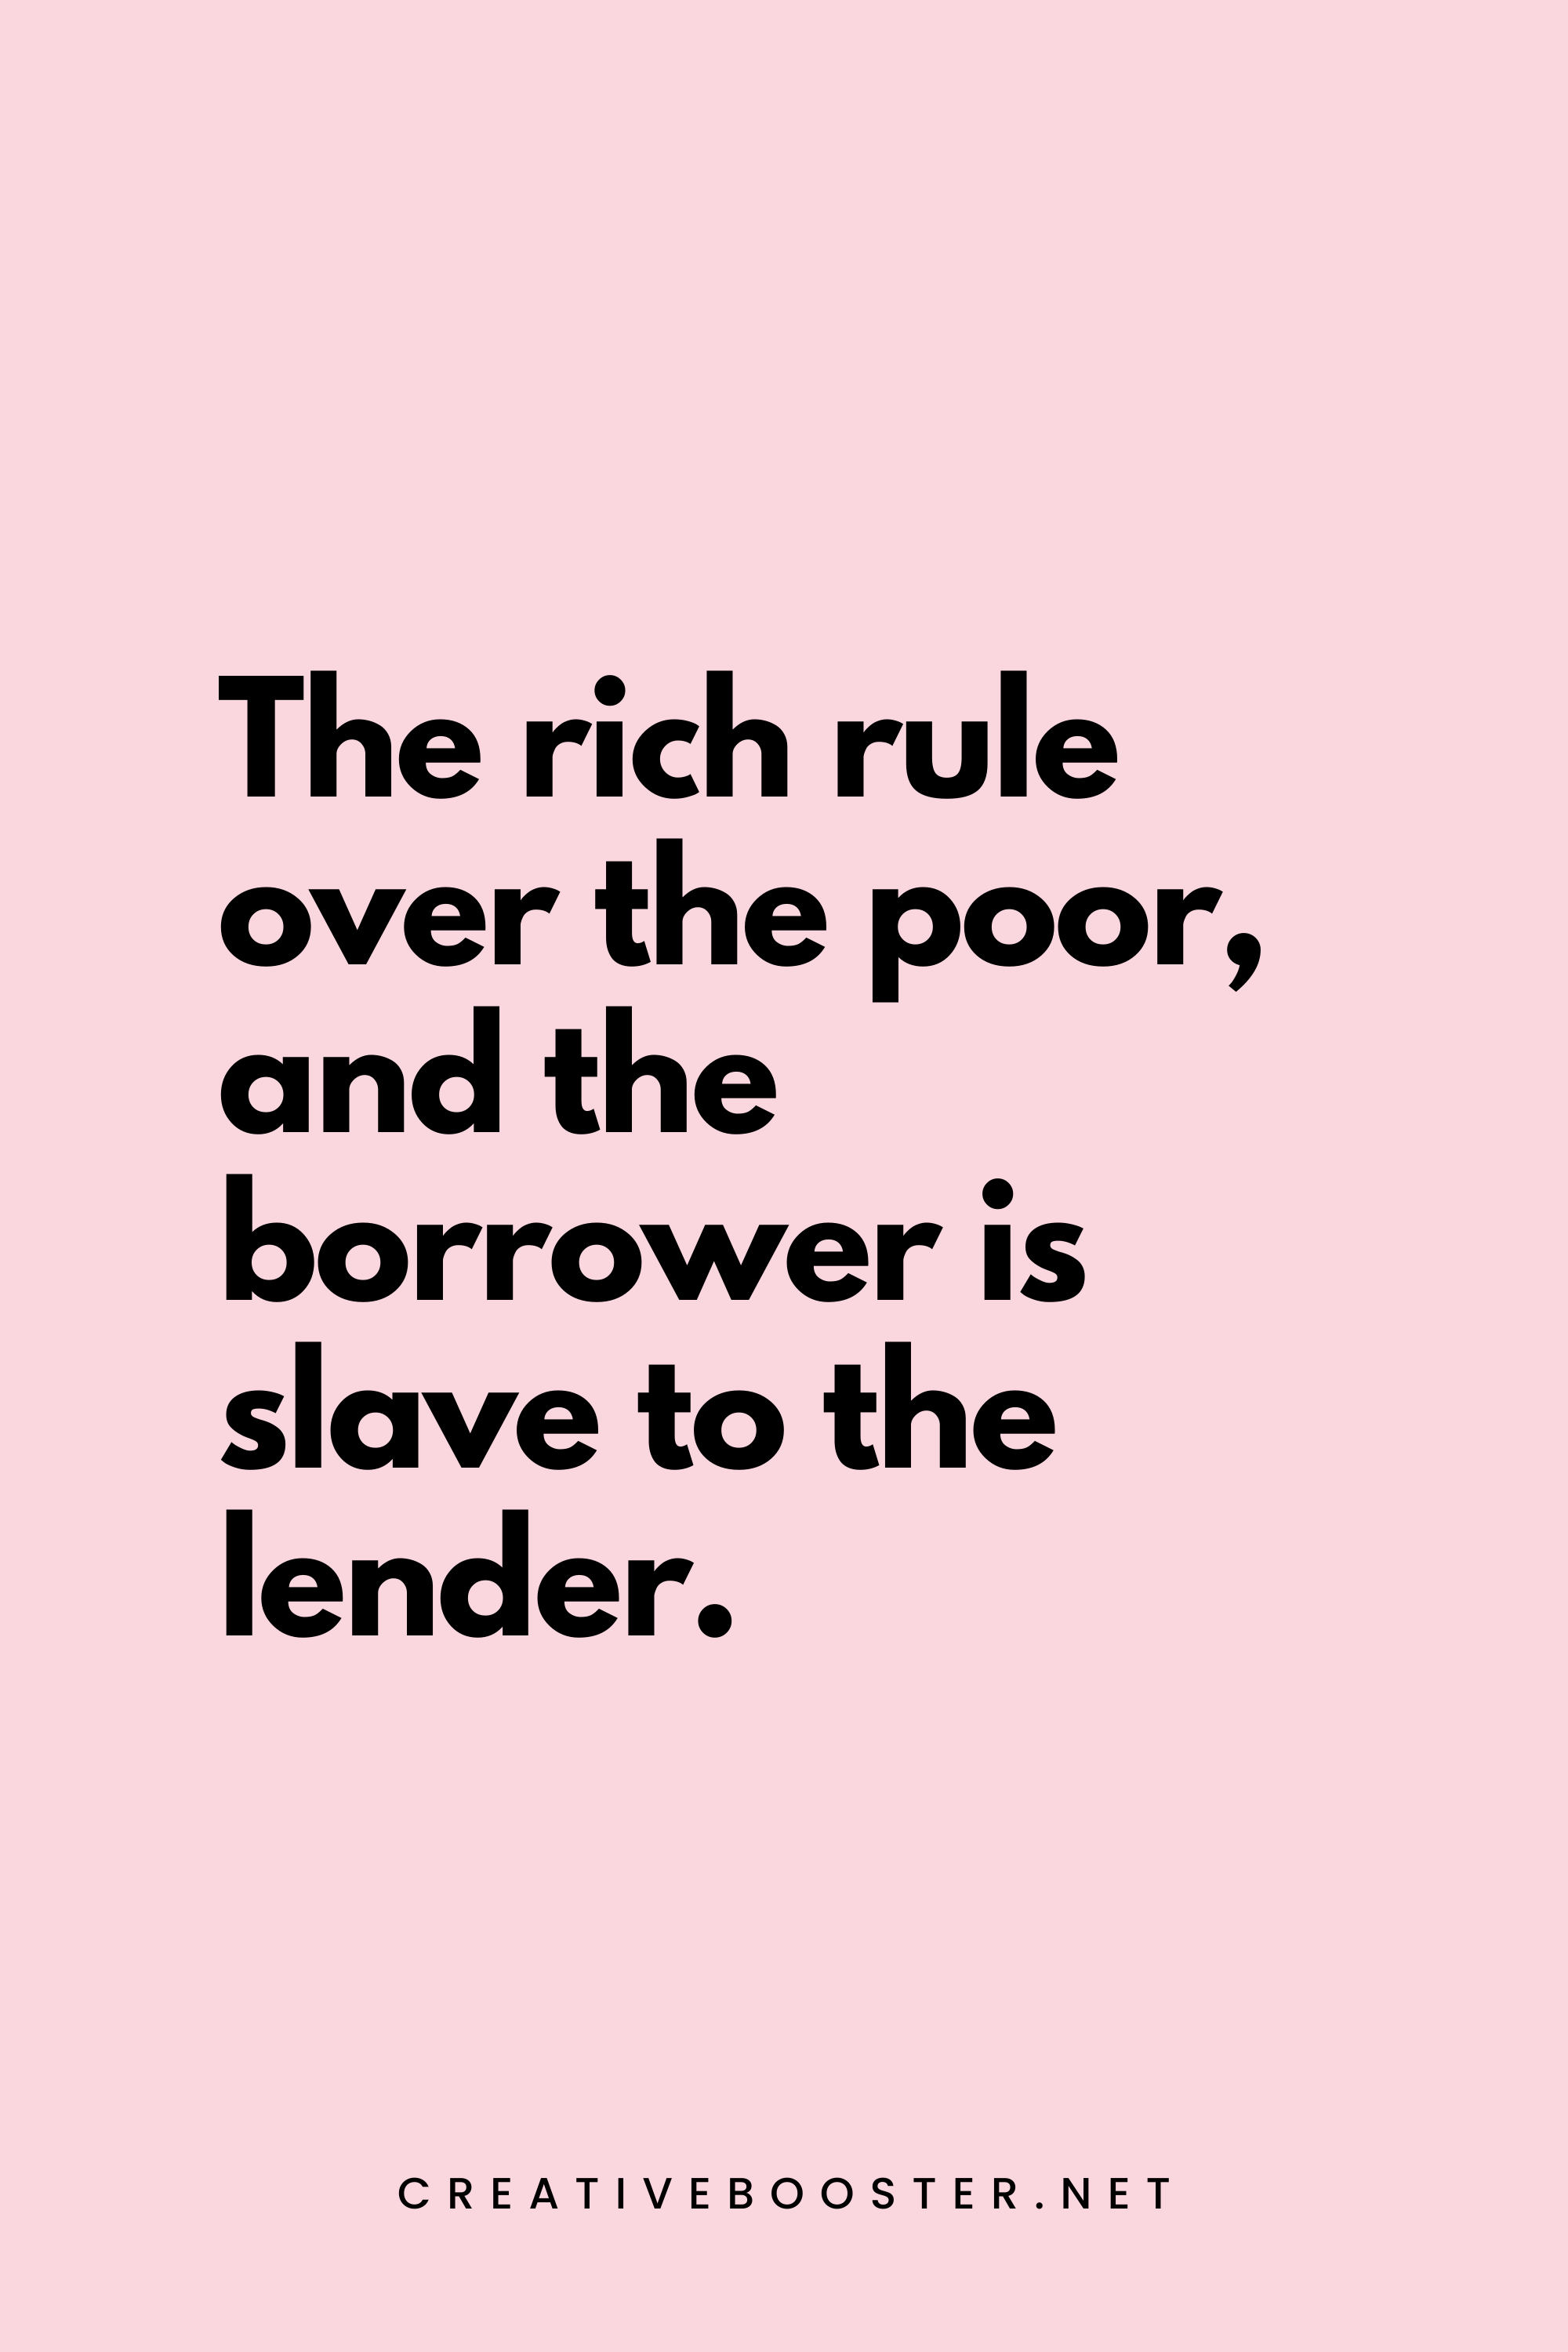 56. The rich rule over the poor, and the borrower is slave to the lender. - Proverbs 22:7 - 5.